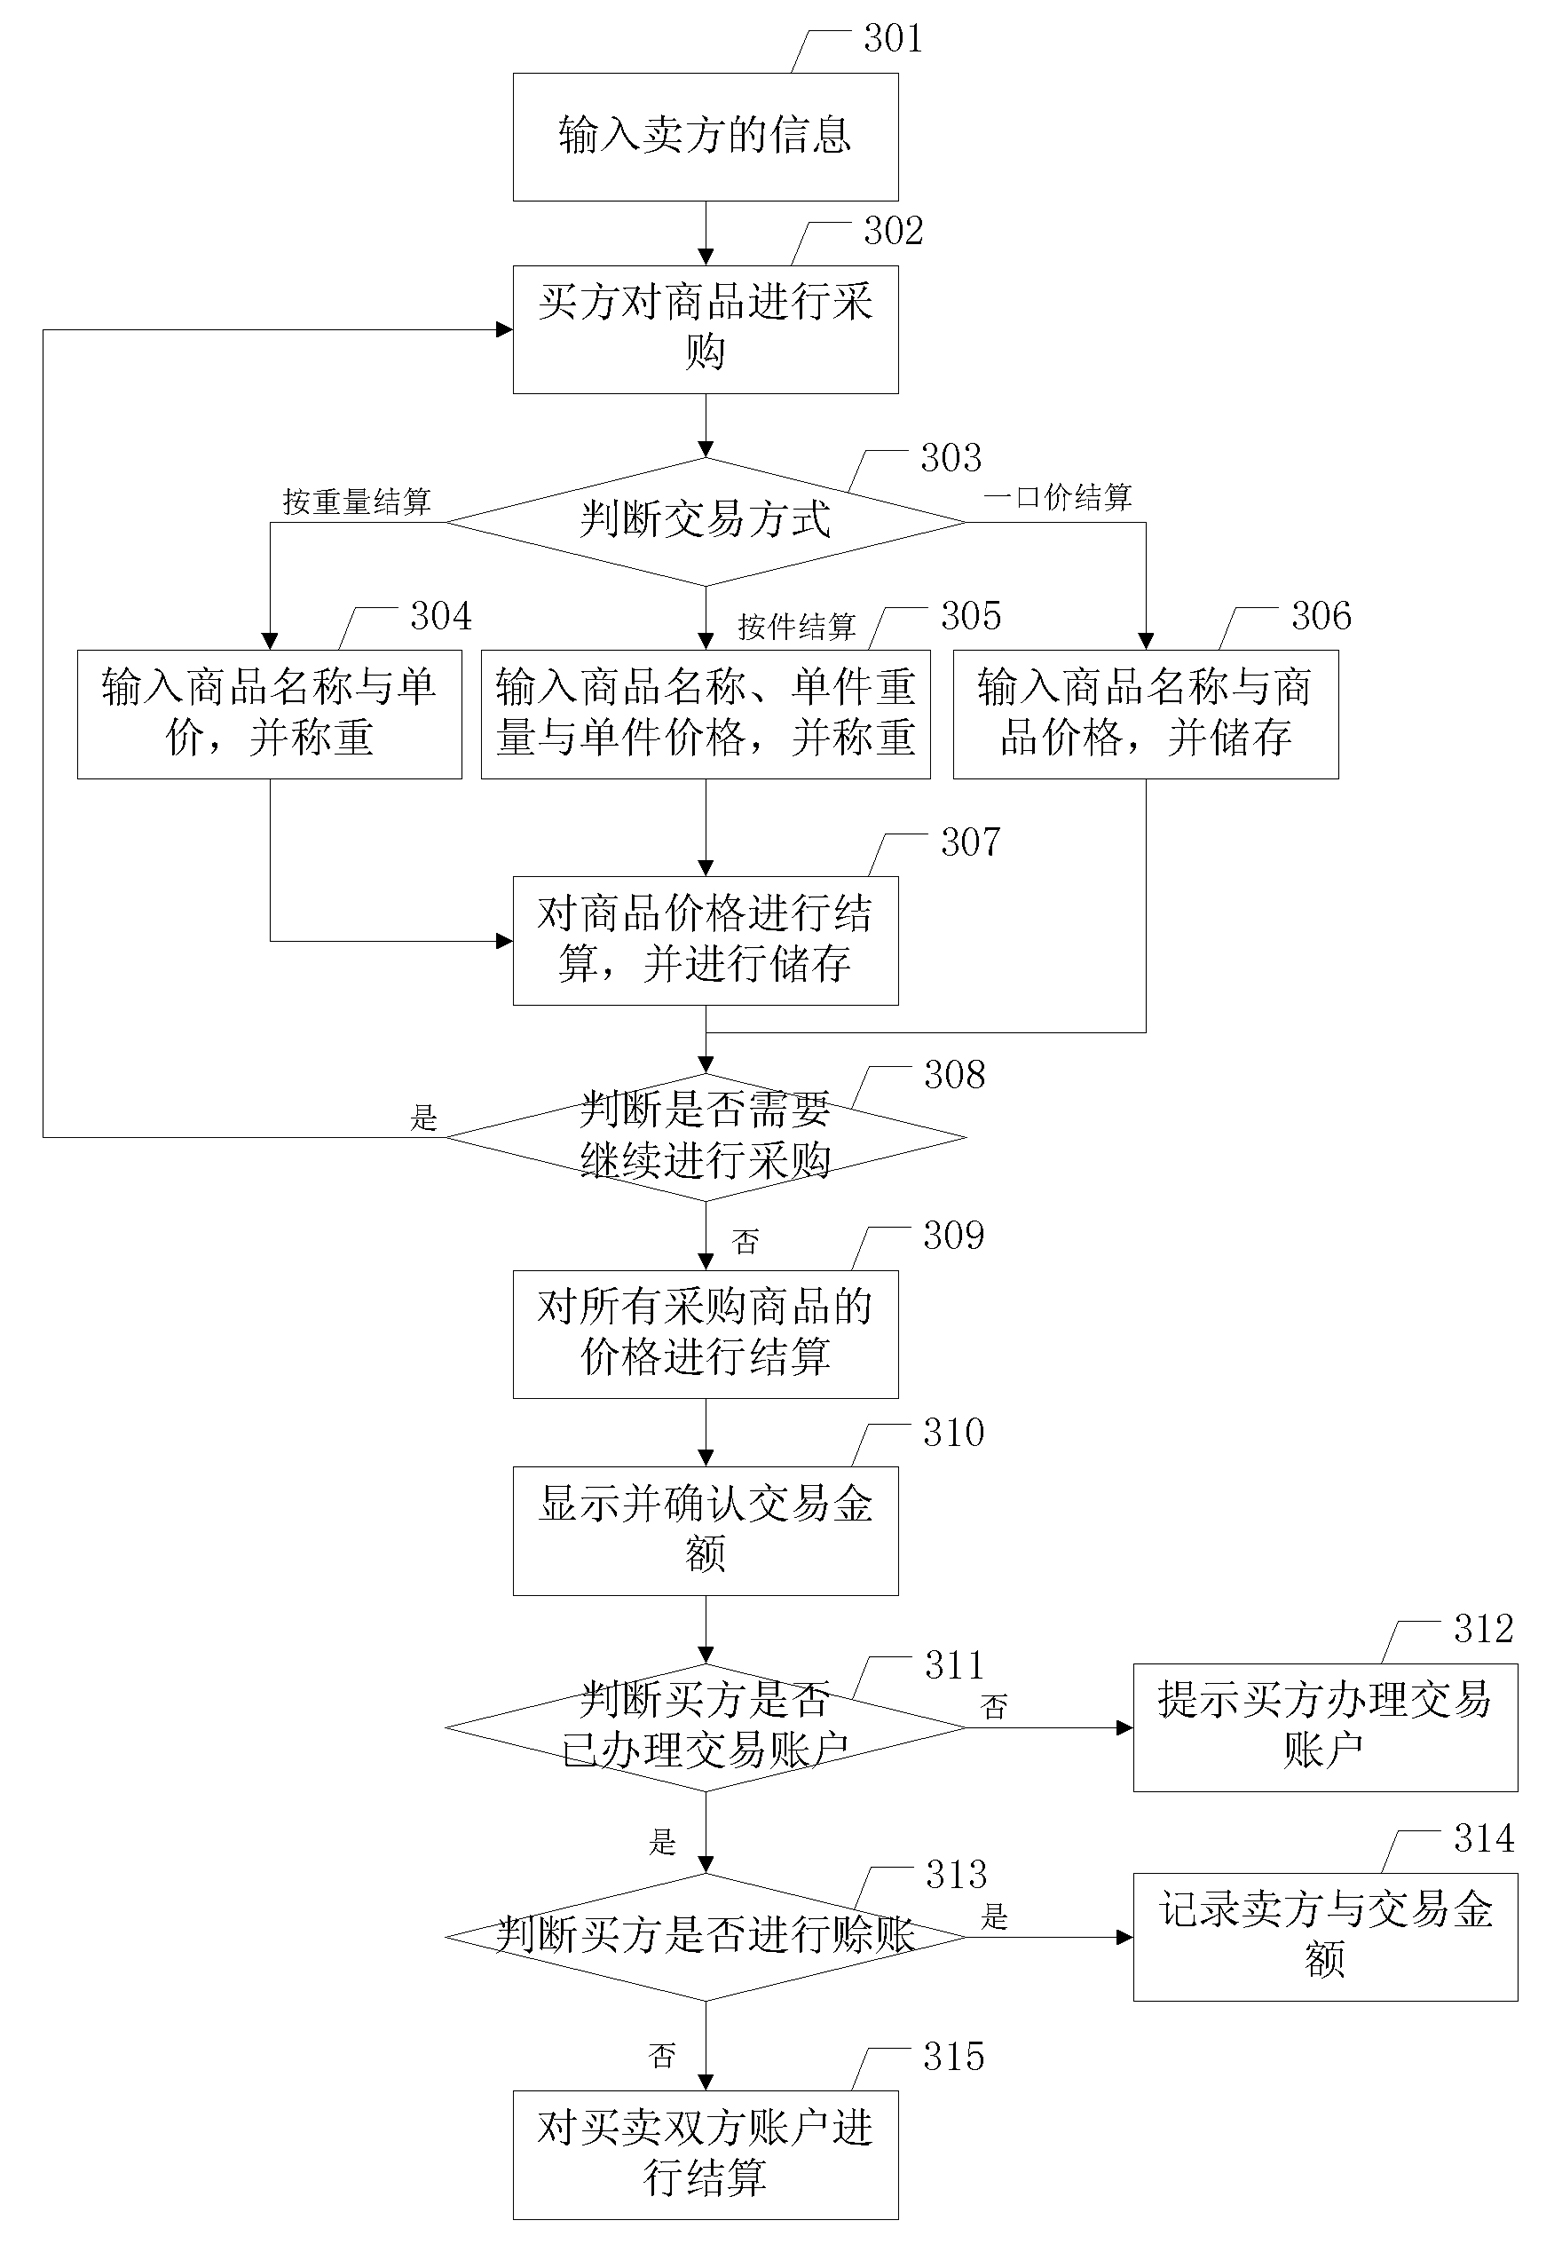 System and method for weighing and valuating agricultural product and method thereof